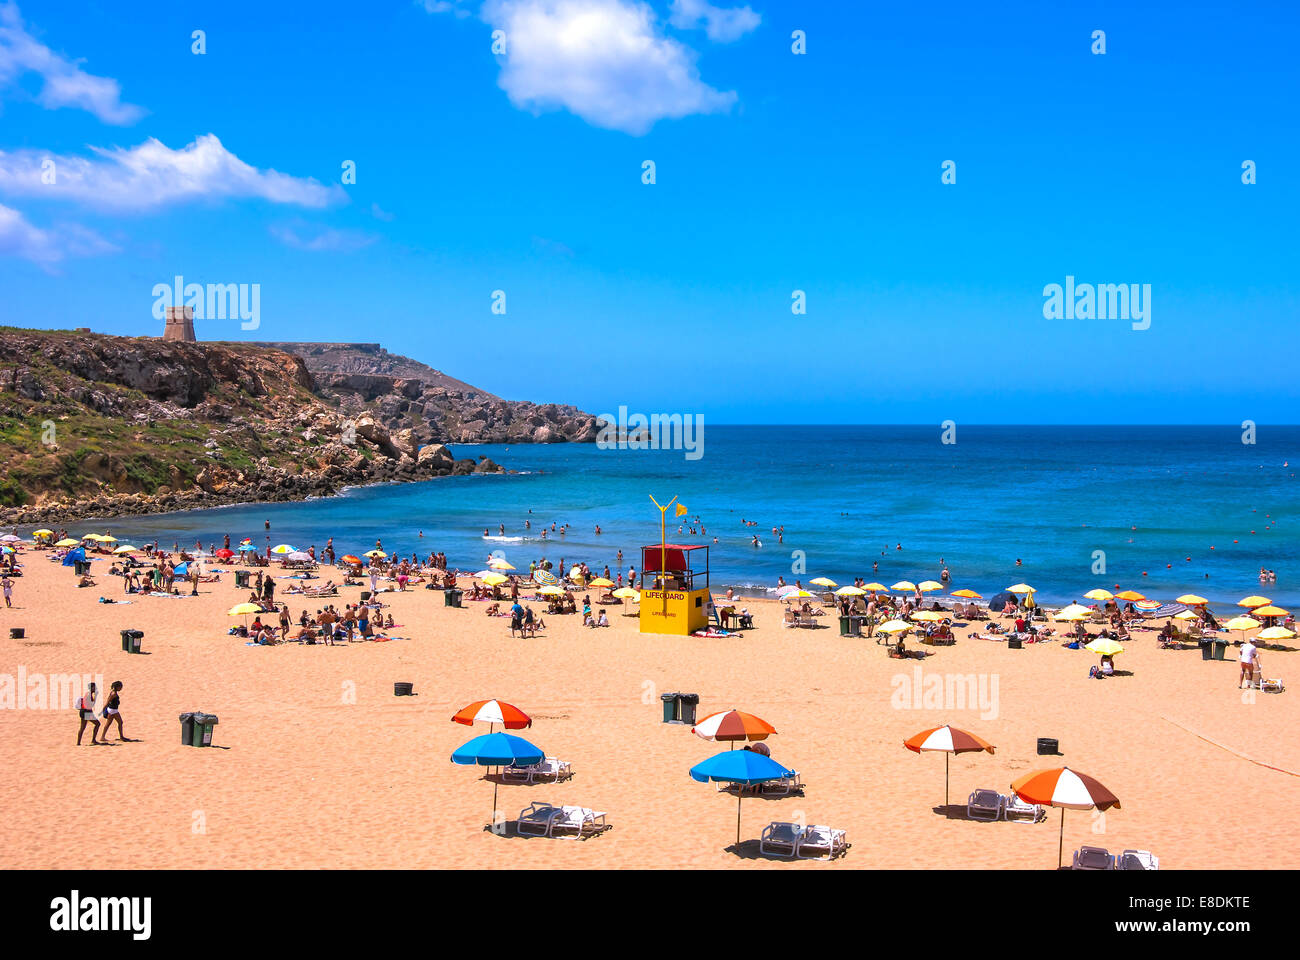 Malta: View over the sandy Golden Bay beach with a watchtower in the background in the northwestern part of Malta. Stock Photo